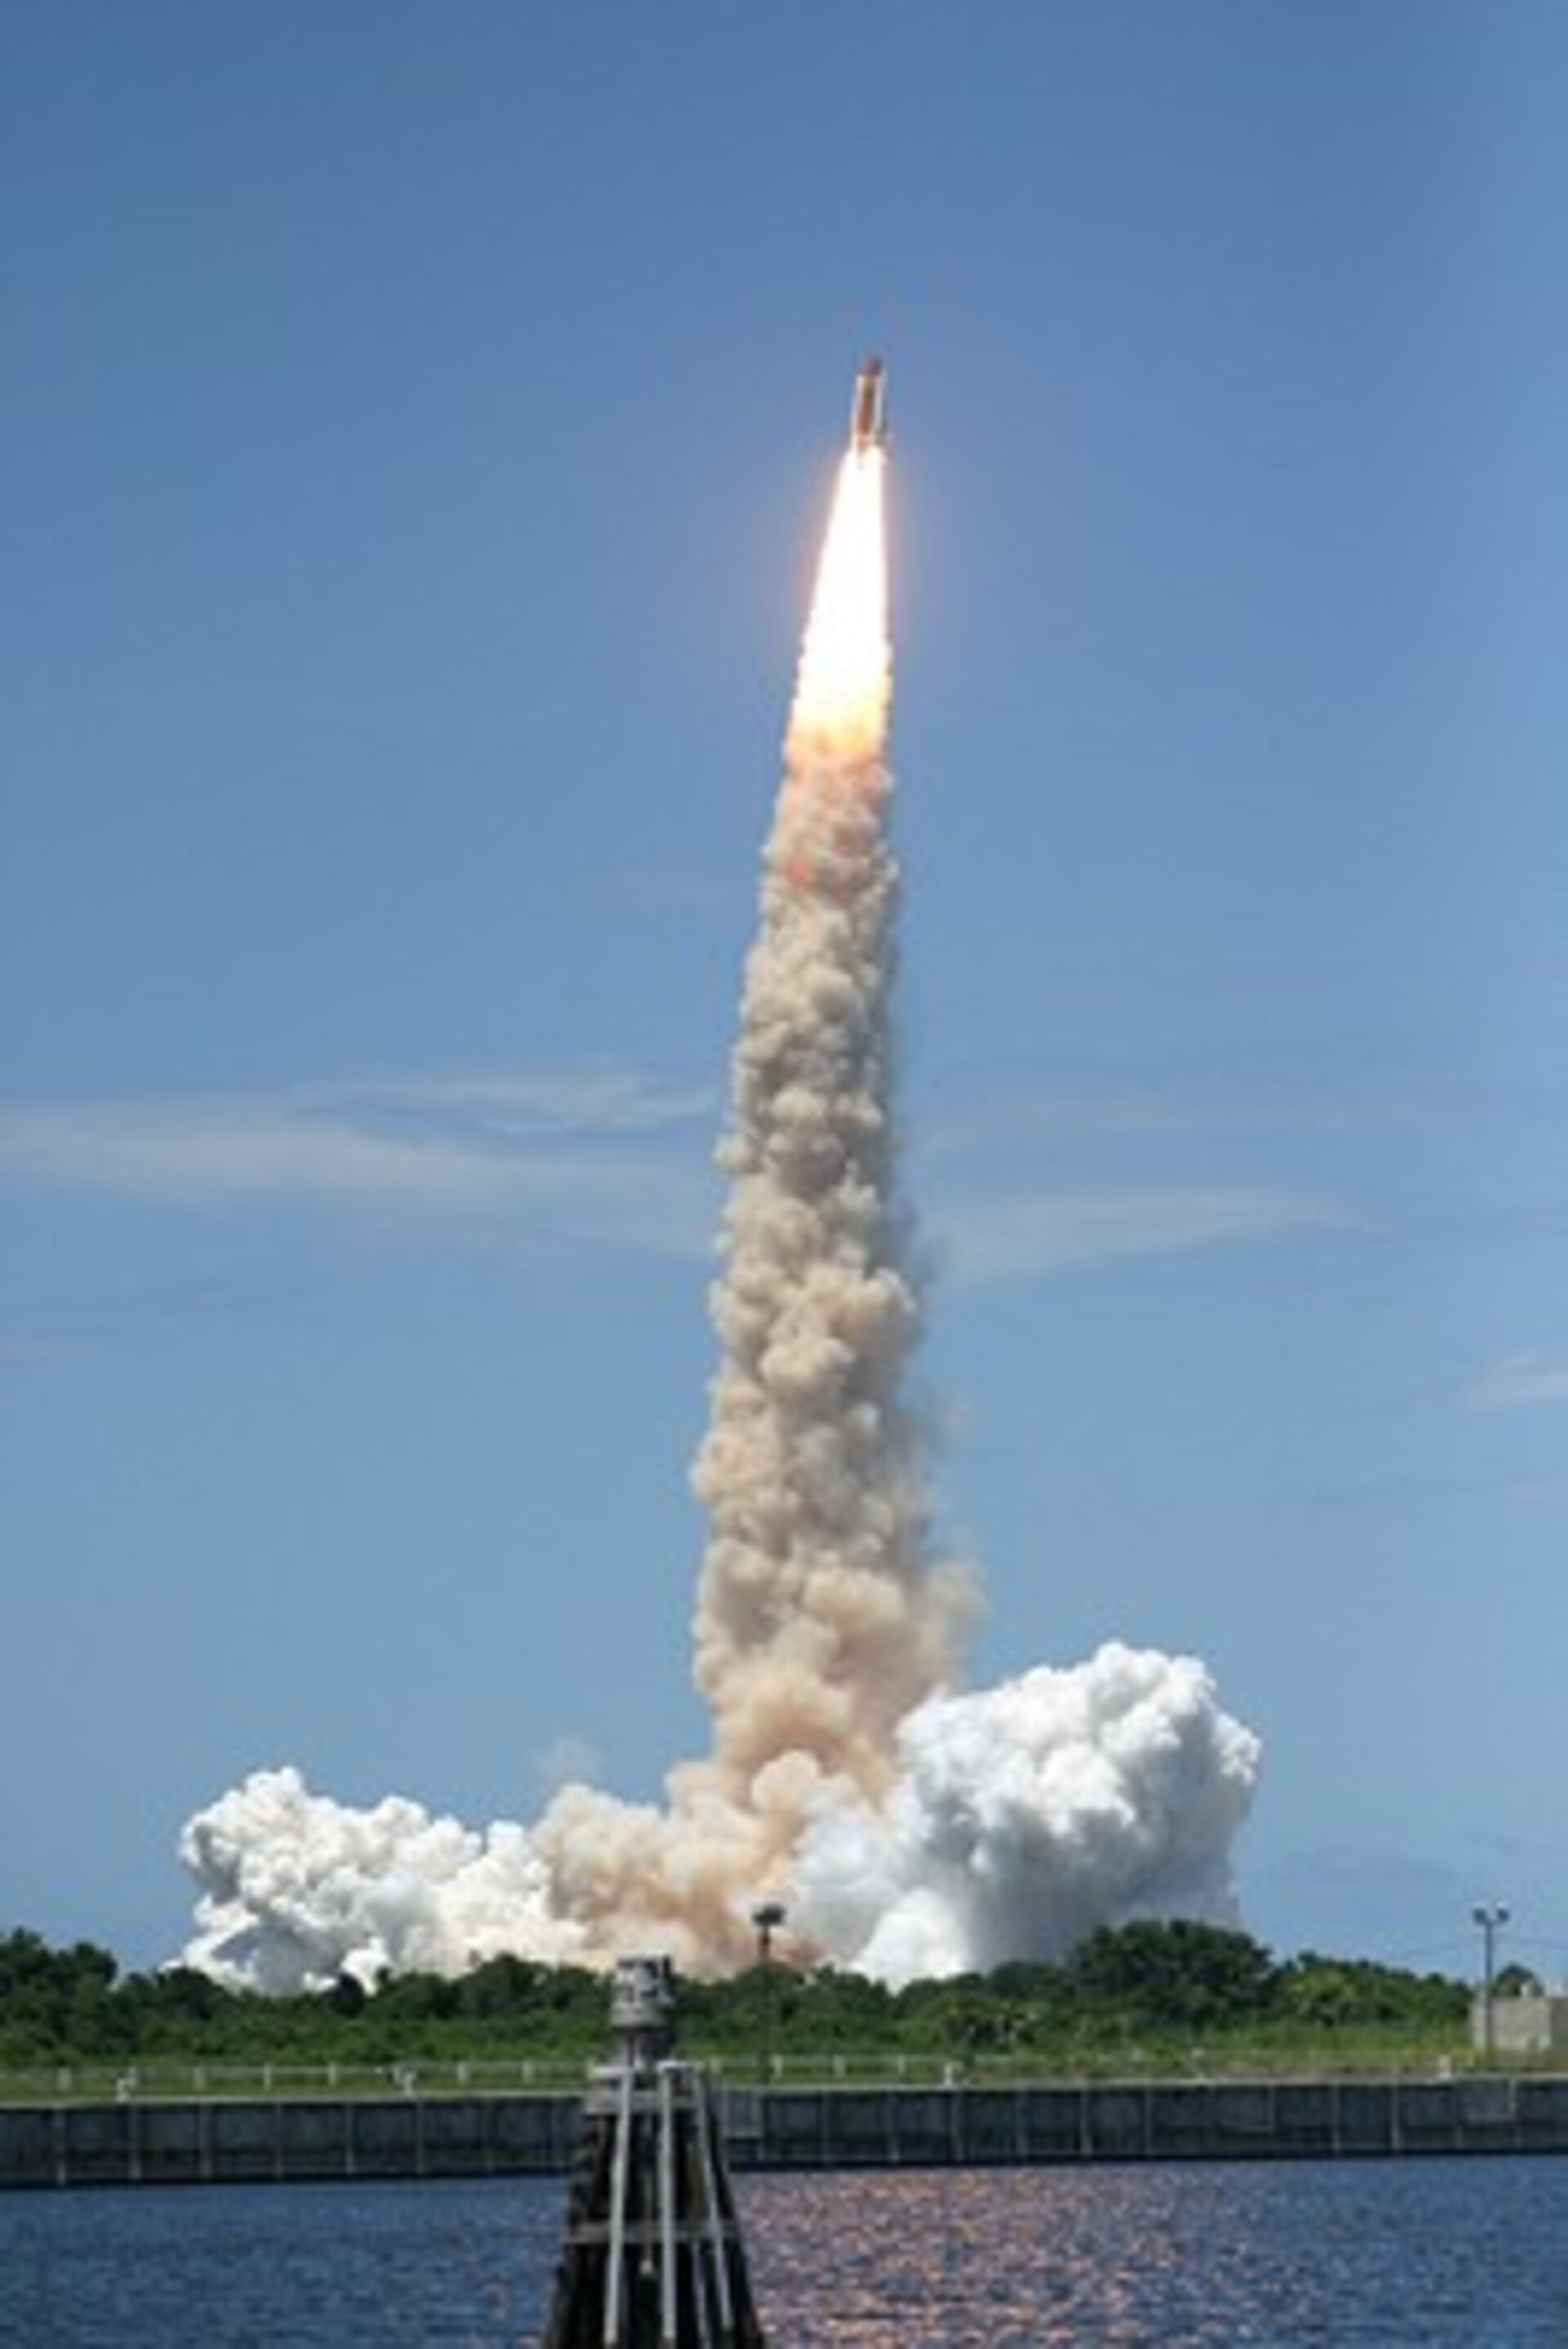 Launch of Space Shuttle Discovery on mission STS-121 at 20:38 CEST (18:38 UT).